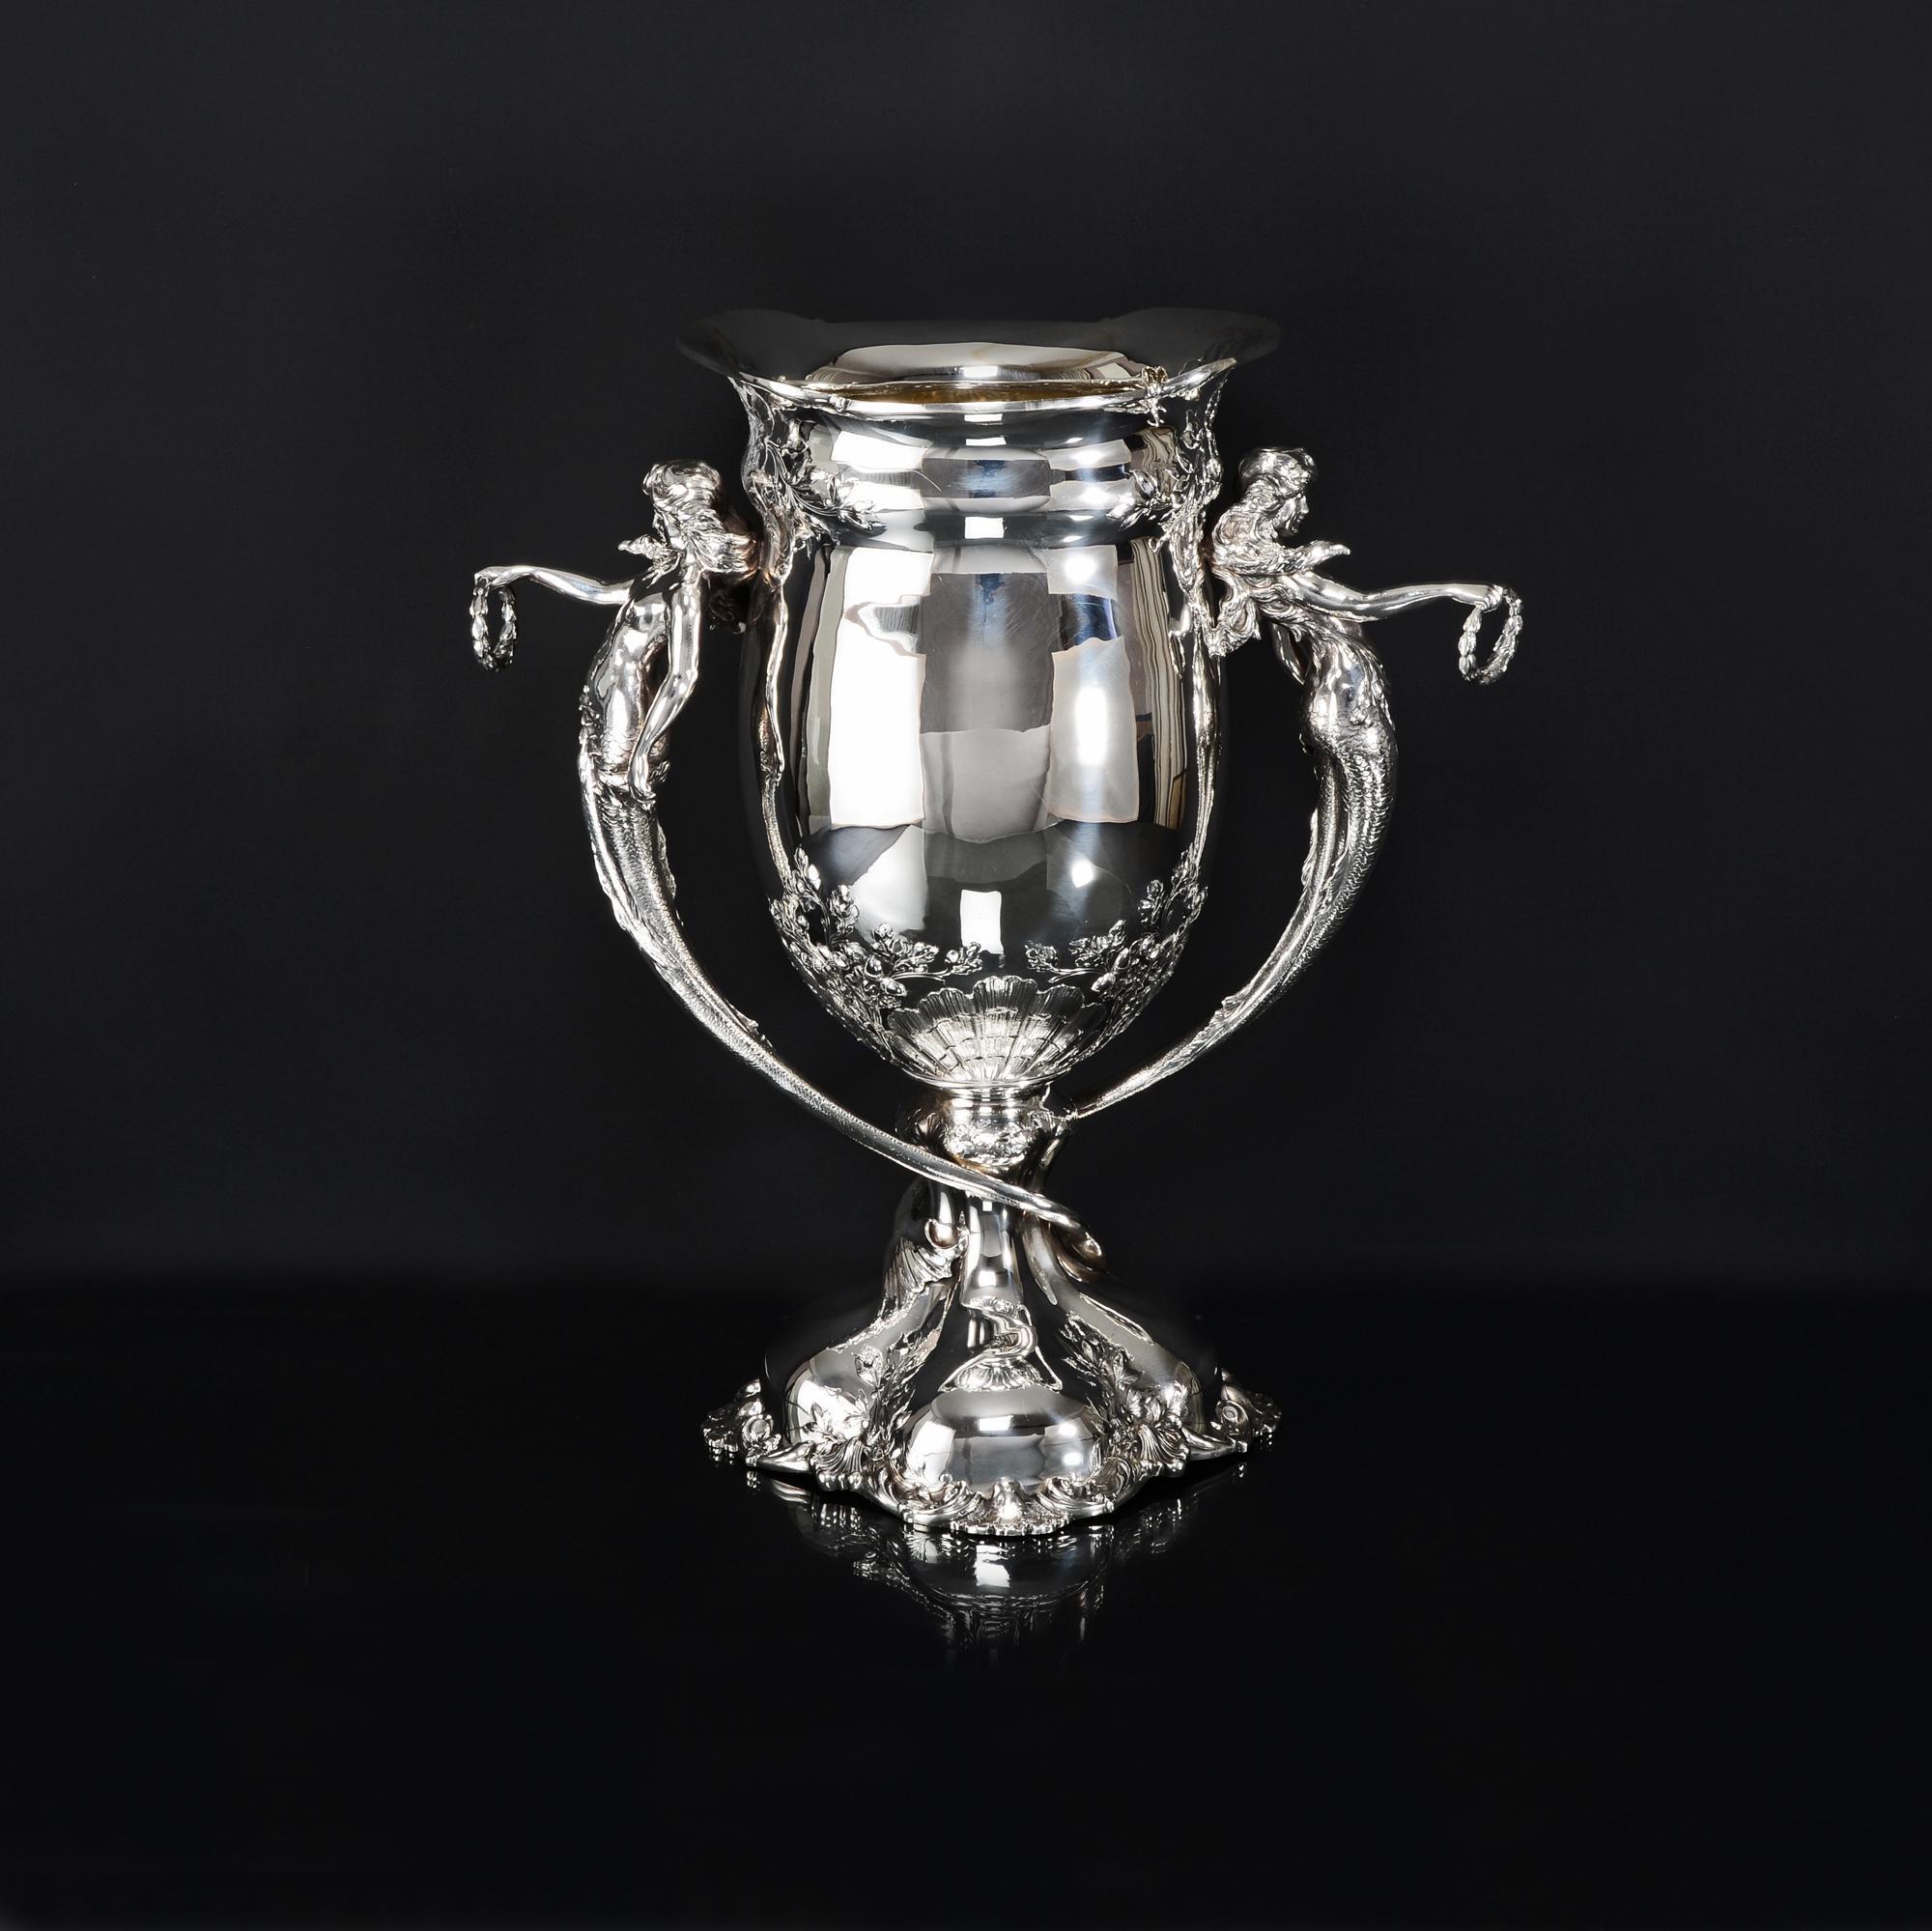 Large antique American silver vase made in the Art Nouveau style. The two swirling handles are beautifully modelled and cast in the the form of mermaids draped in seaweed and holding laurel wreaths in outstretched arms. The body and base of this